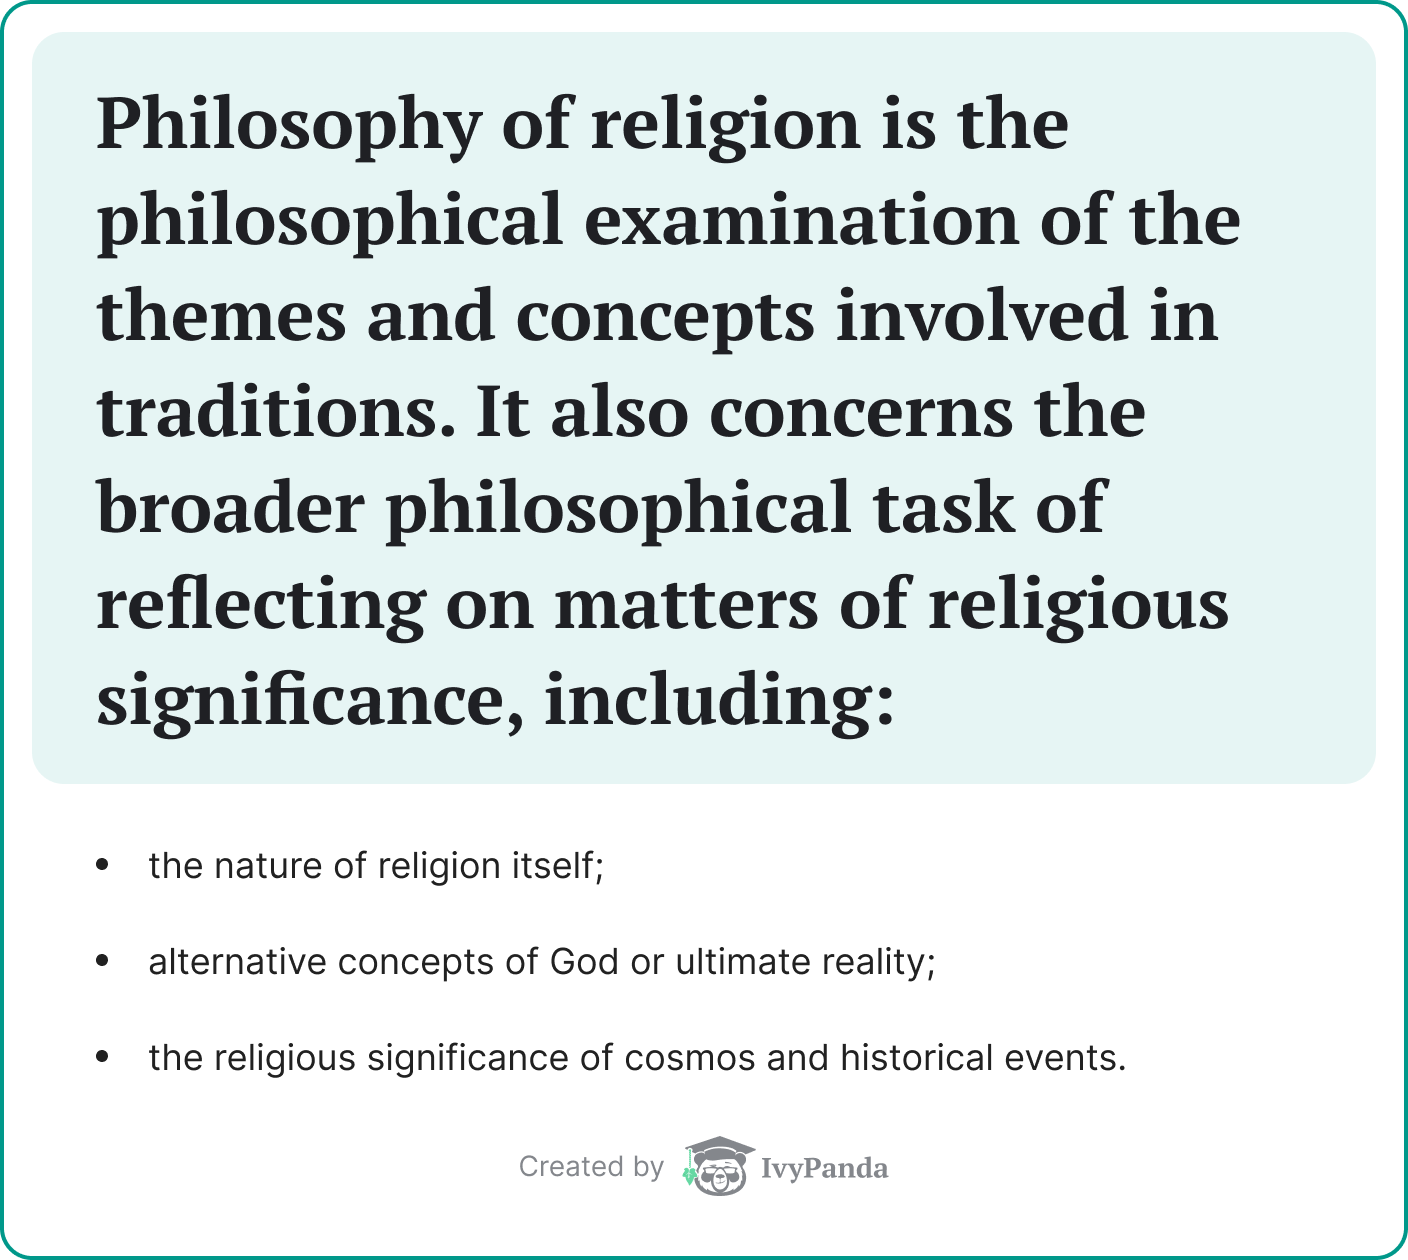 Philosophy of religion is the examination of the themes and concepts involved in religious traditions.